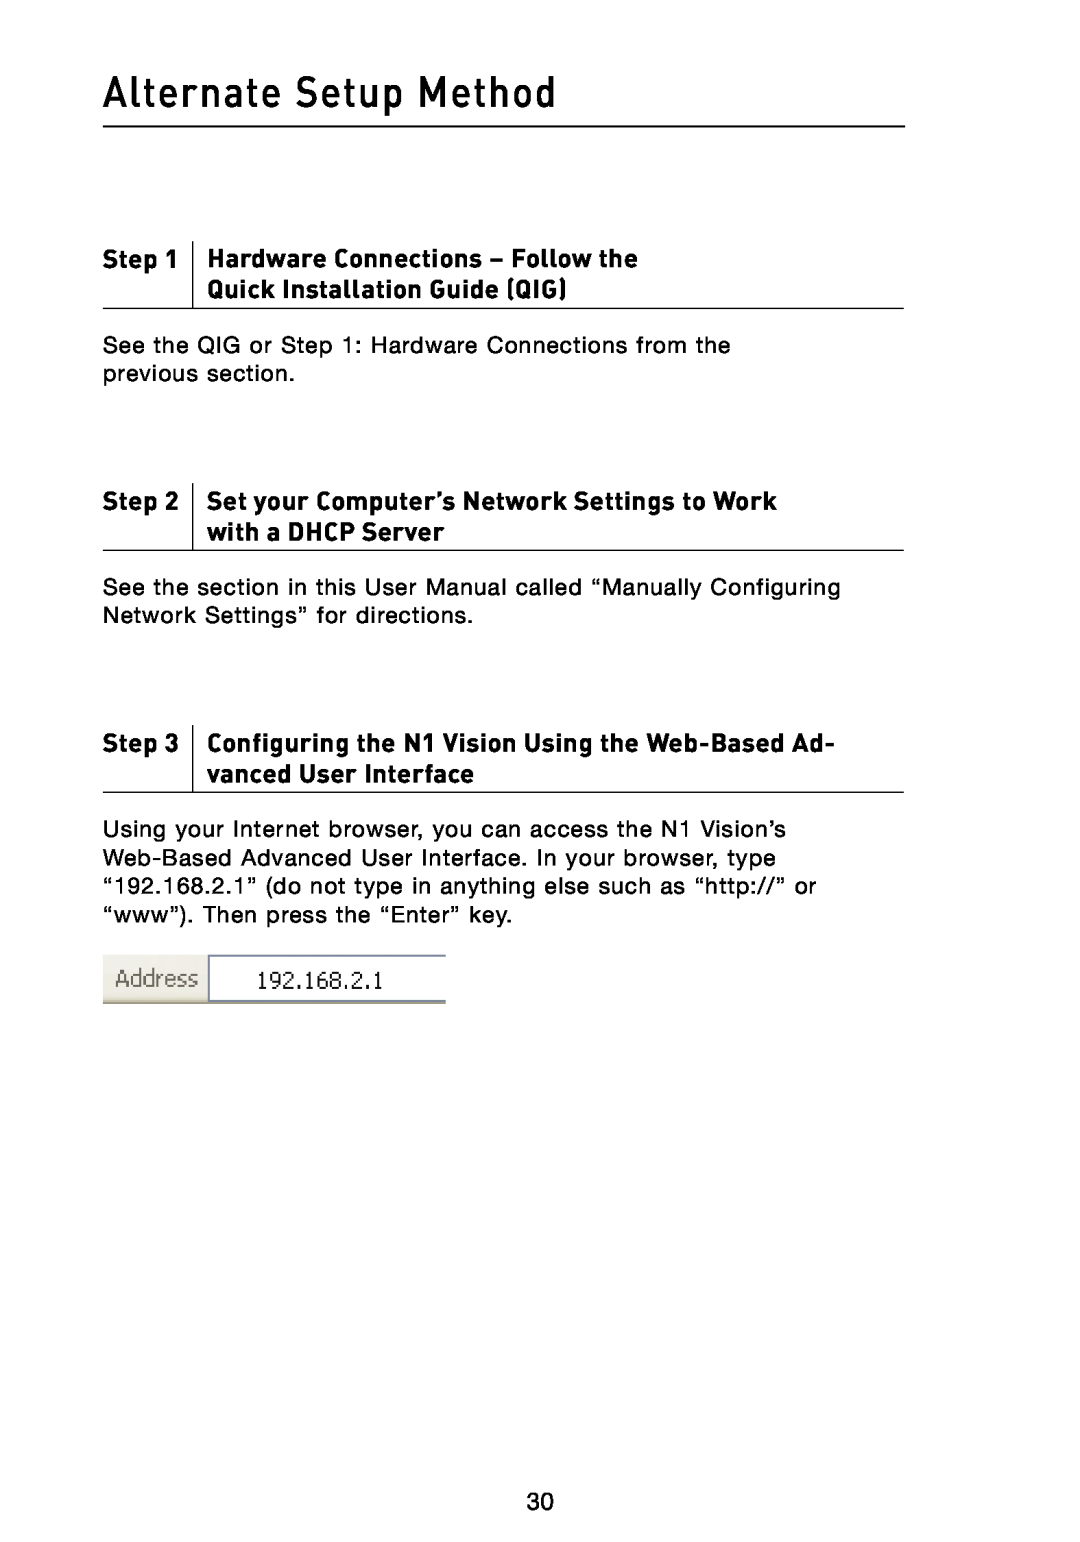 Belkin N1 user manual Alternate Setup Method, Hardware Connections - Follow the Quick Installation Guide QIG, Step 